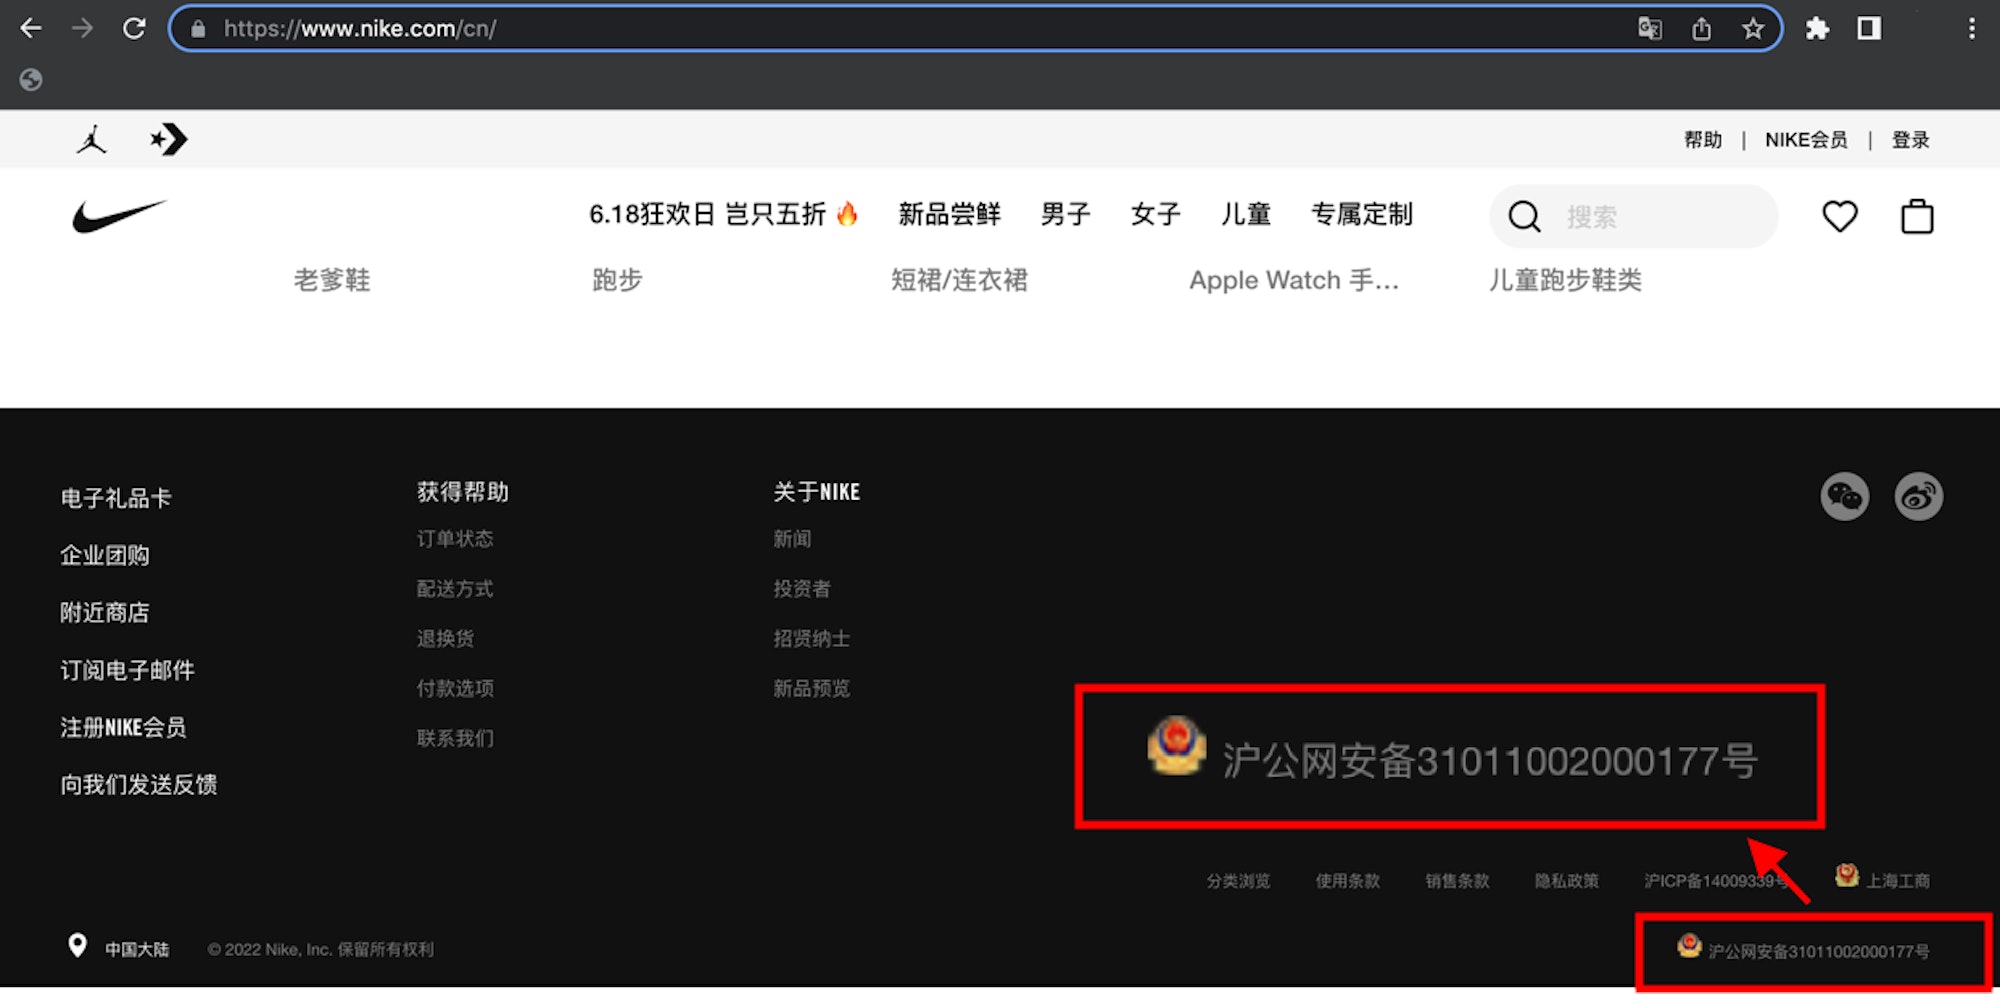 ICP license number example in footer (Nike.com/cn/)